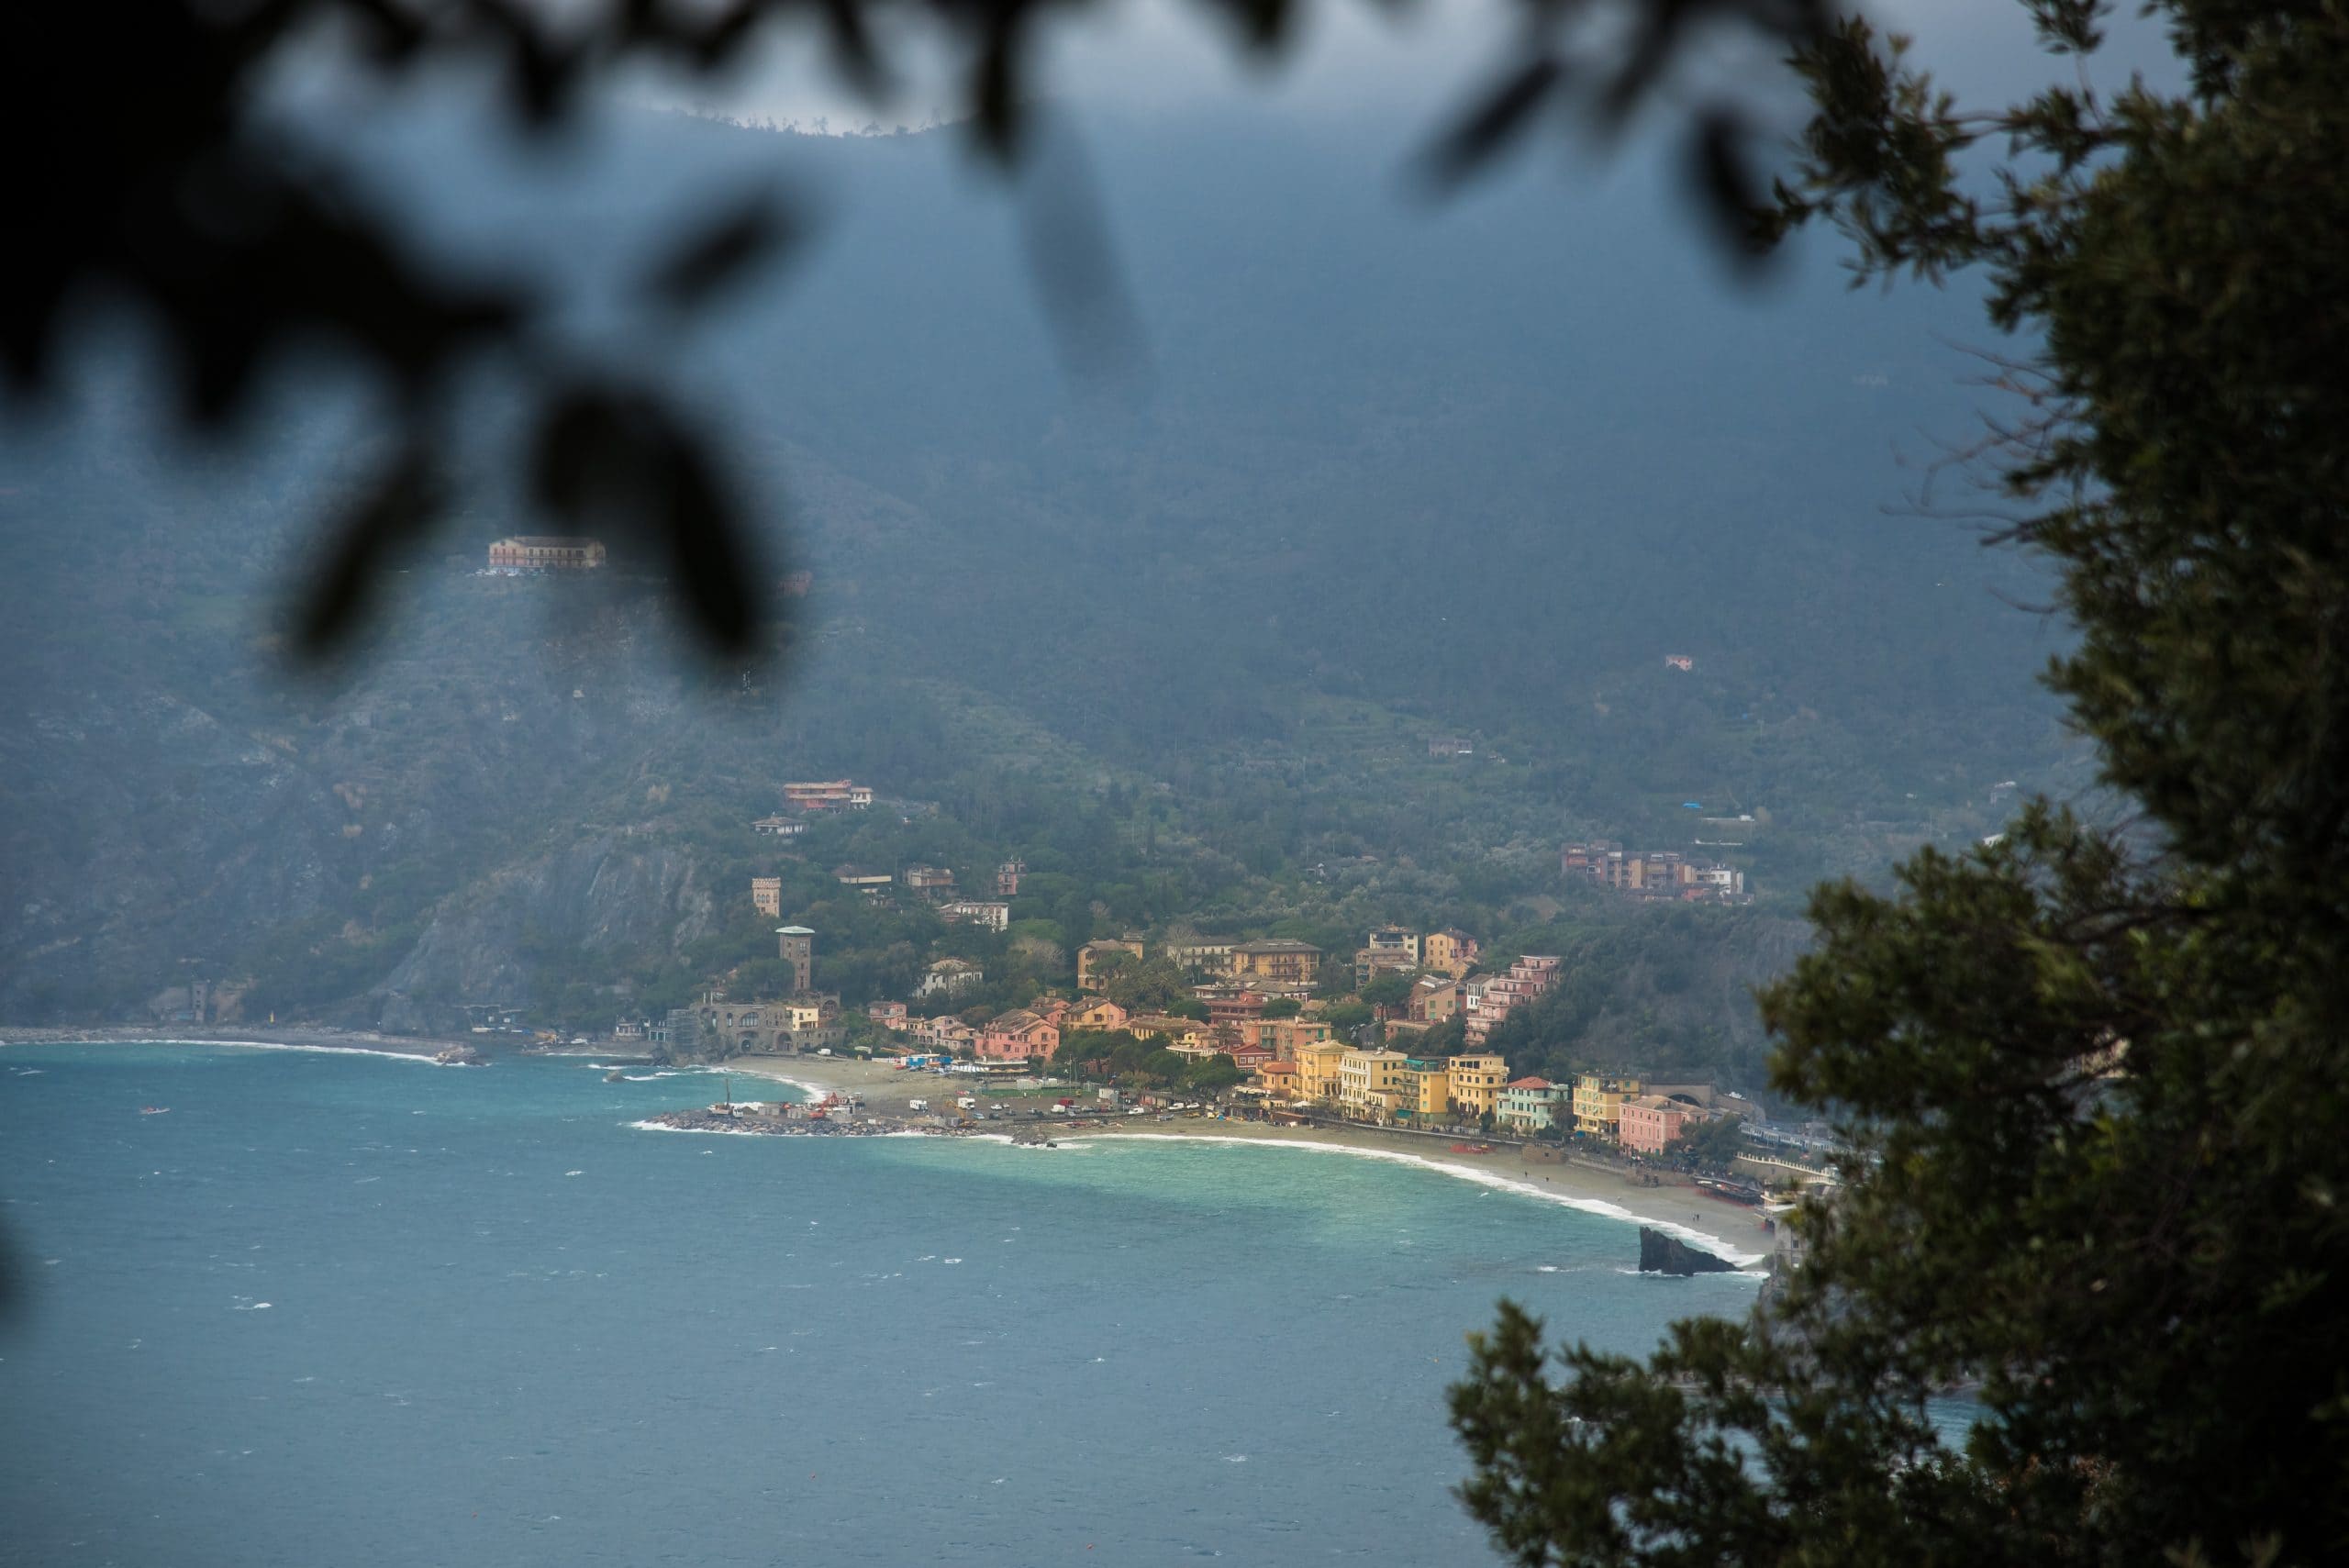 views of Monterosso in Cinque Terre from the hiking trail that connects it to Vernazza